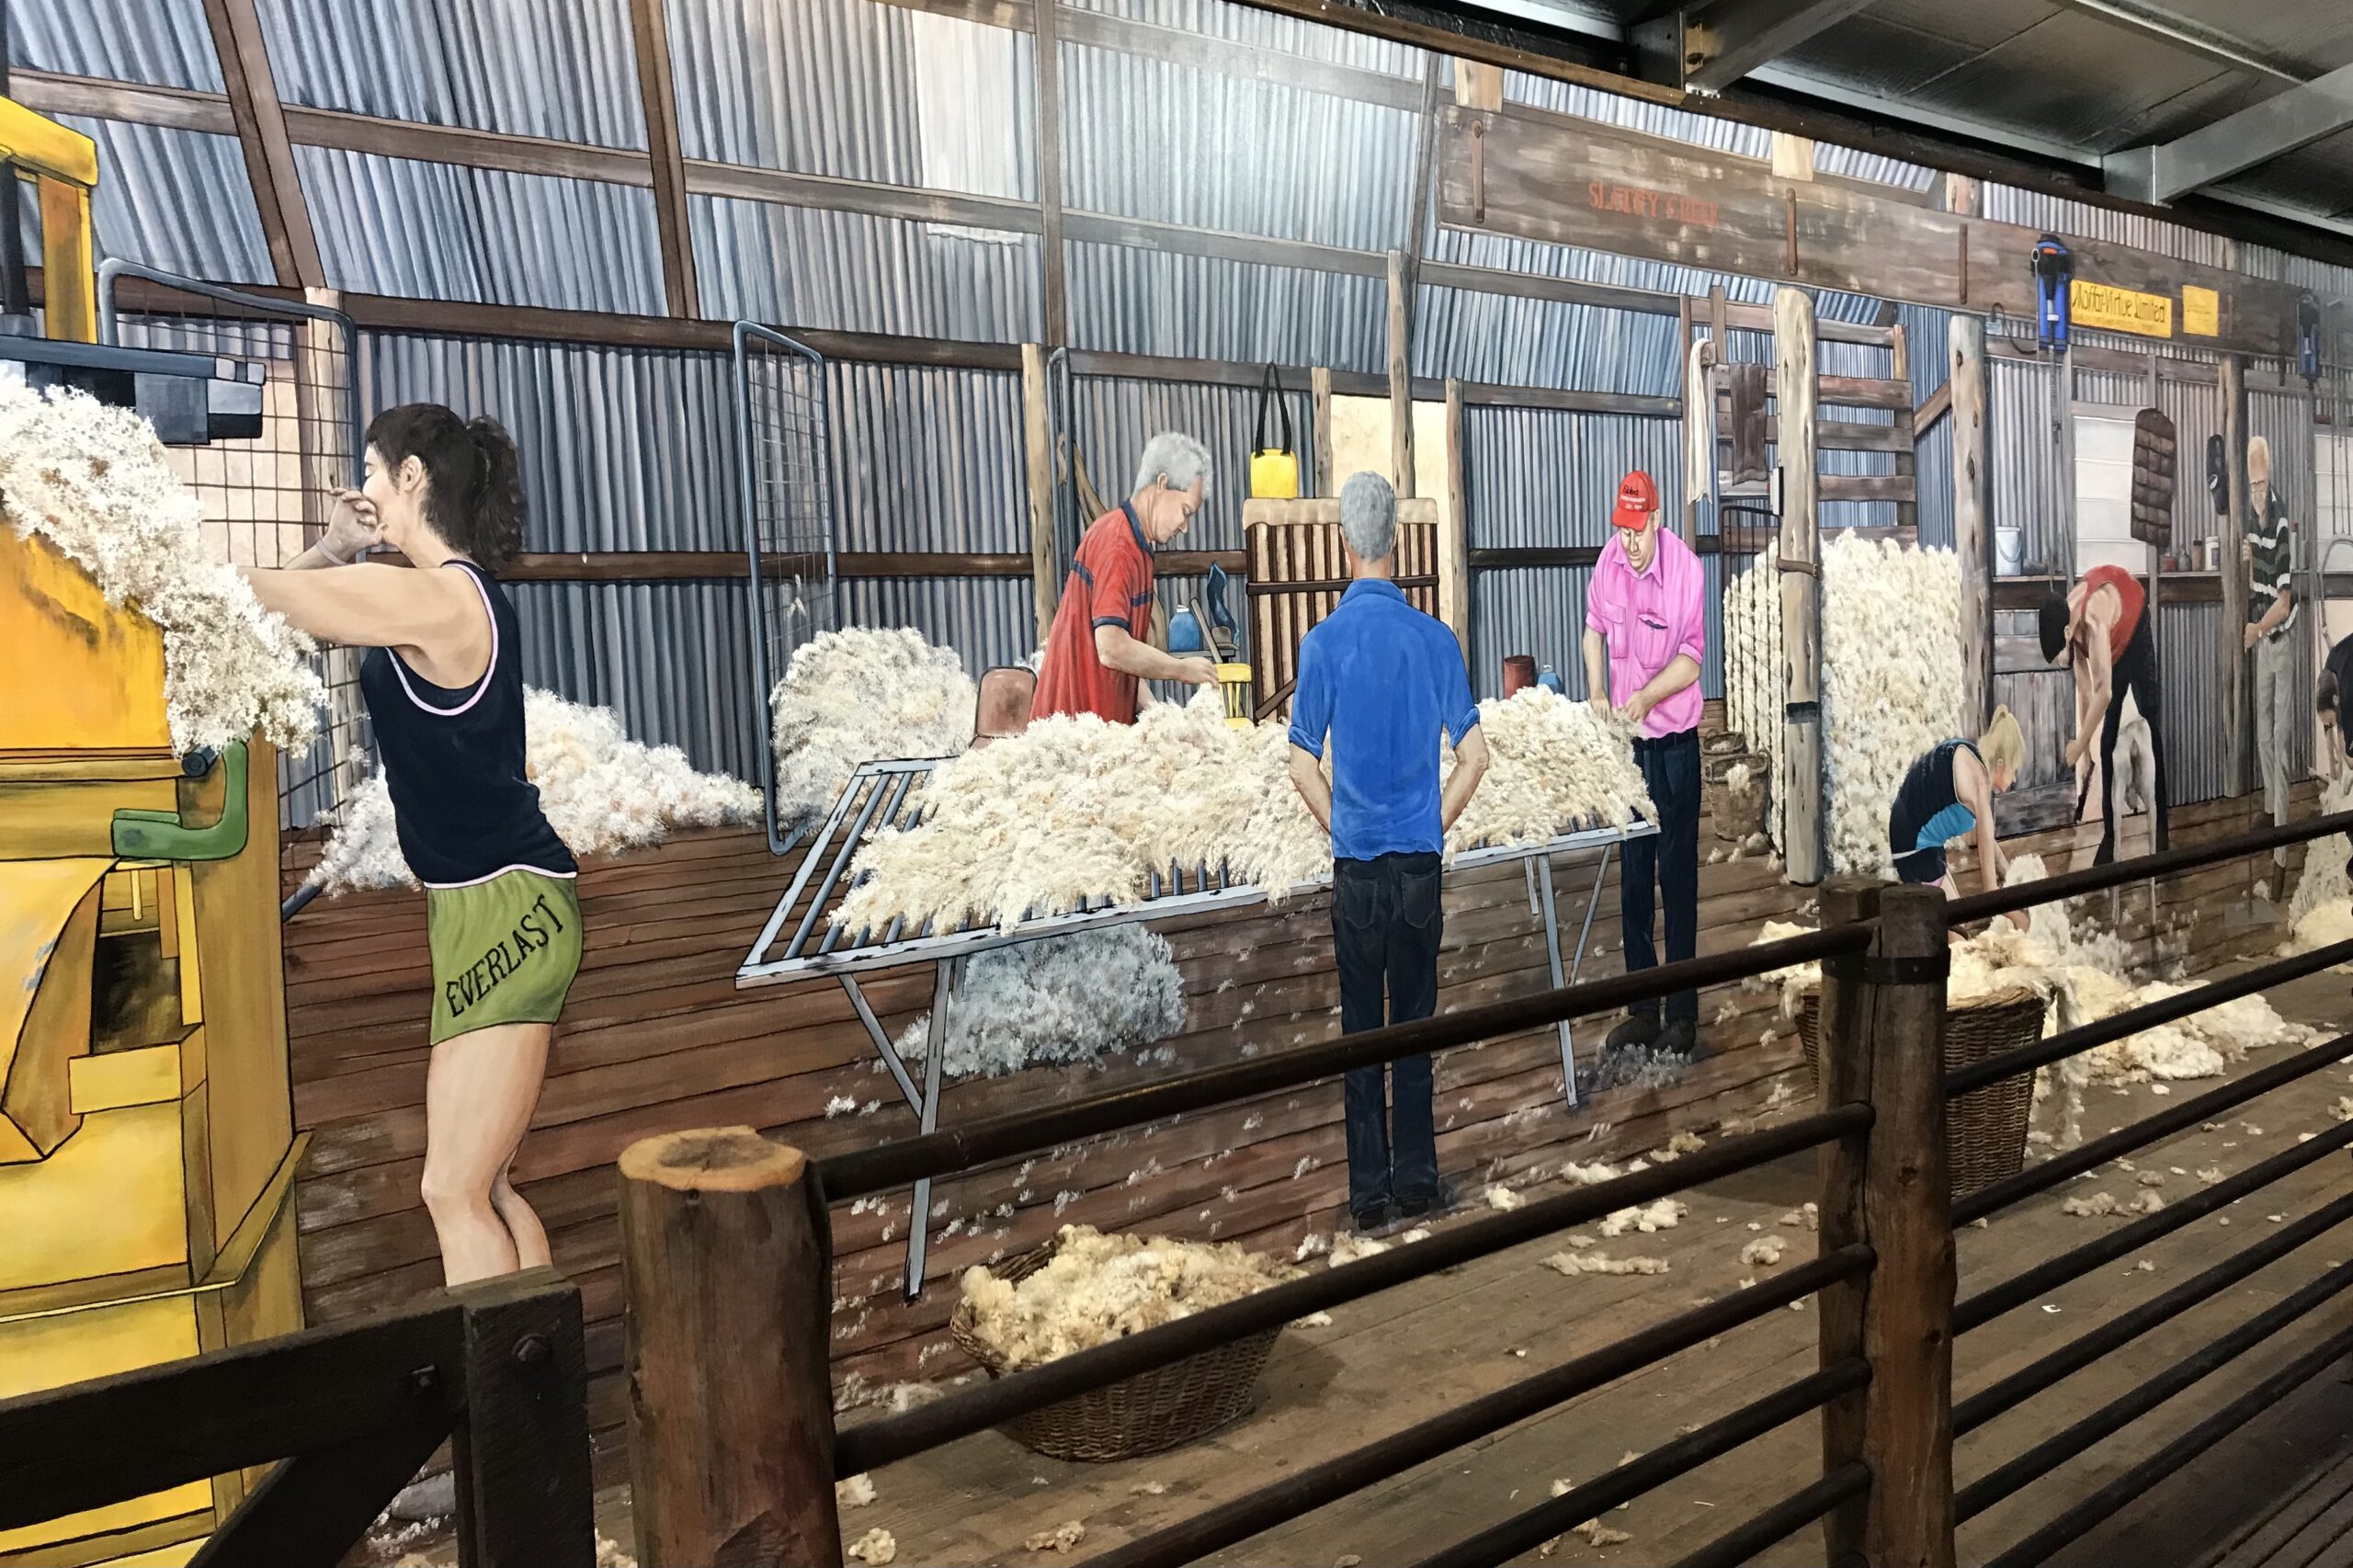 His life size depiction of a shearing shed